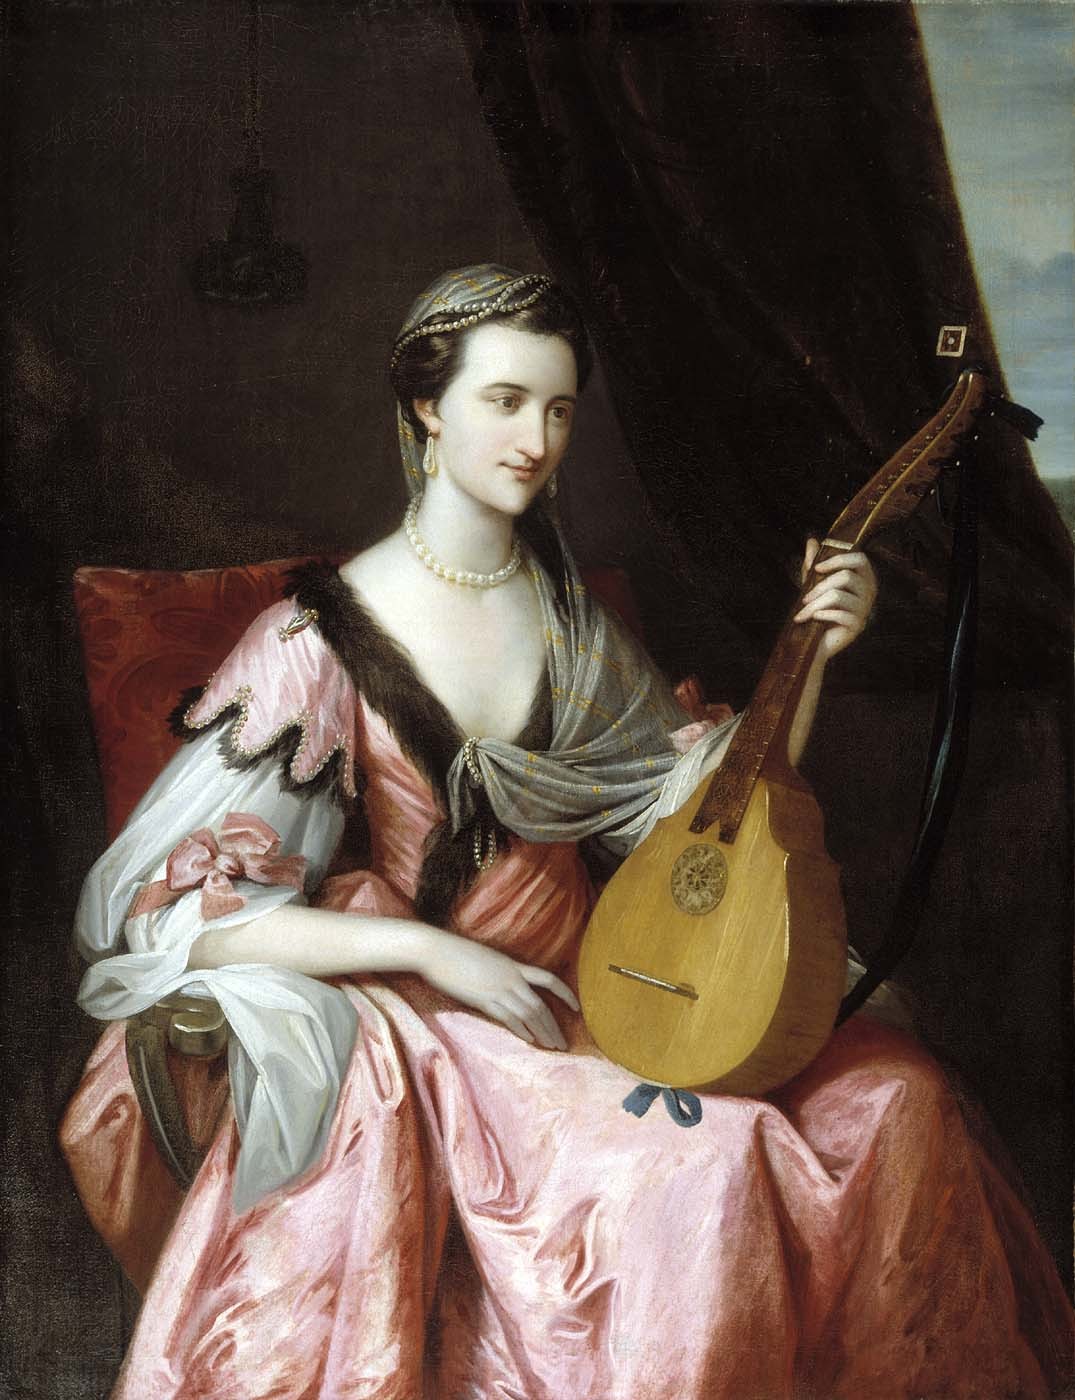 Mary Hopkinson (c.1764). Benjamin West (American, 1738-1820). Oil on canvas. Smithsonian American Art Museum.
Mary Hopkinson was the wife of Dr. John Morgan, chief surgeon of the Continental army and founder of the Penn Medical School. West painted from a miniature of Mary brought to London. The mandolin was a fashionable instrument for aristocratic ladies. She wears a lavish pink satin gown with a sable collar and pearls. This outfit was not typical dress for colonial women, but was invented by West to conjure 18th-century European tastes for all things related to the Orient.